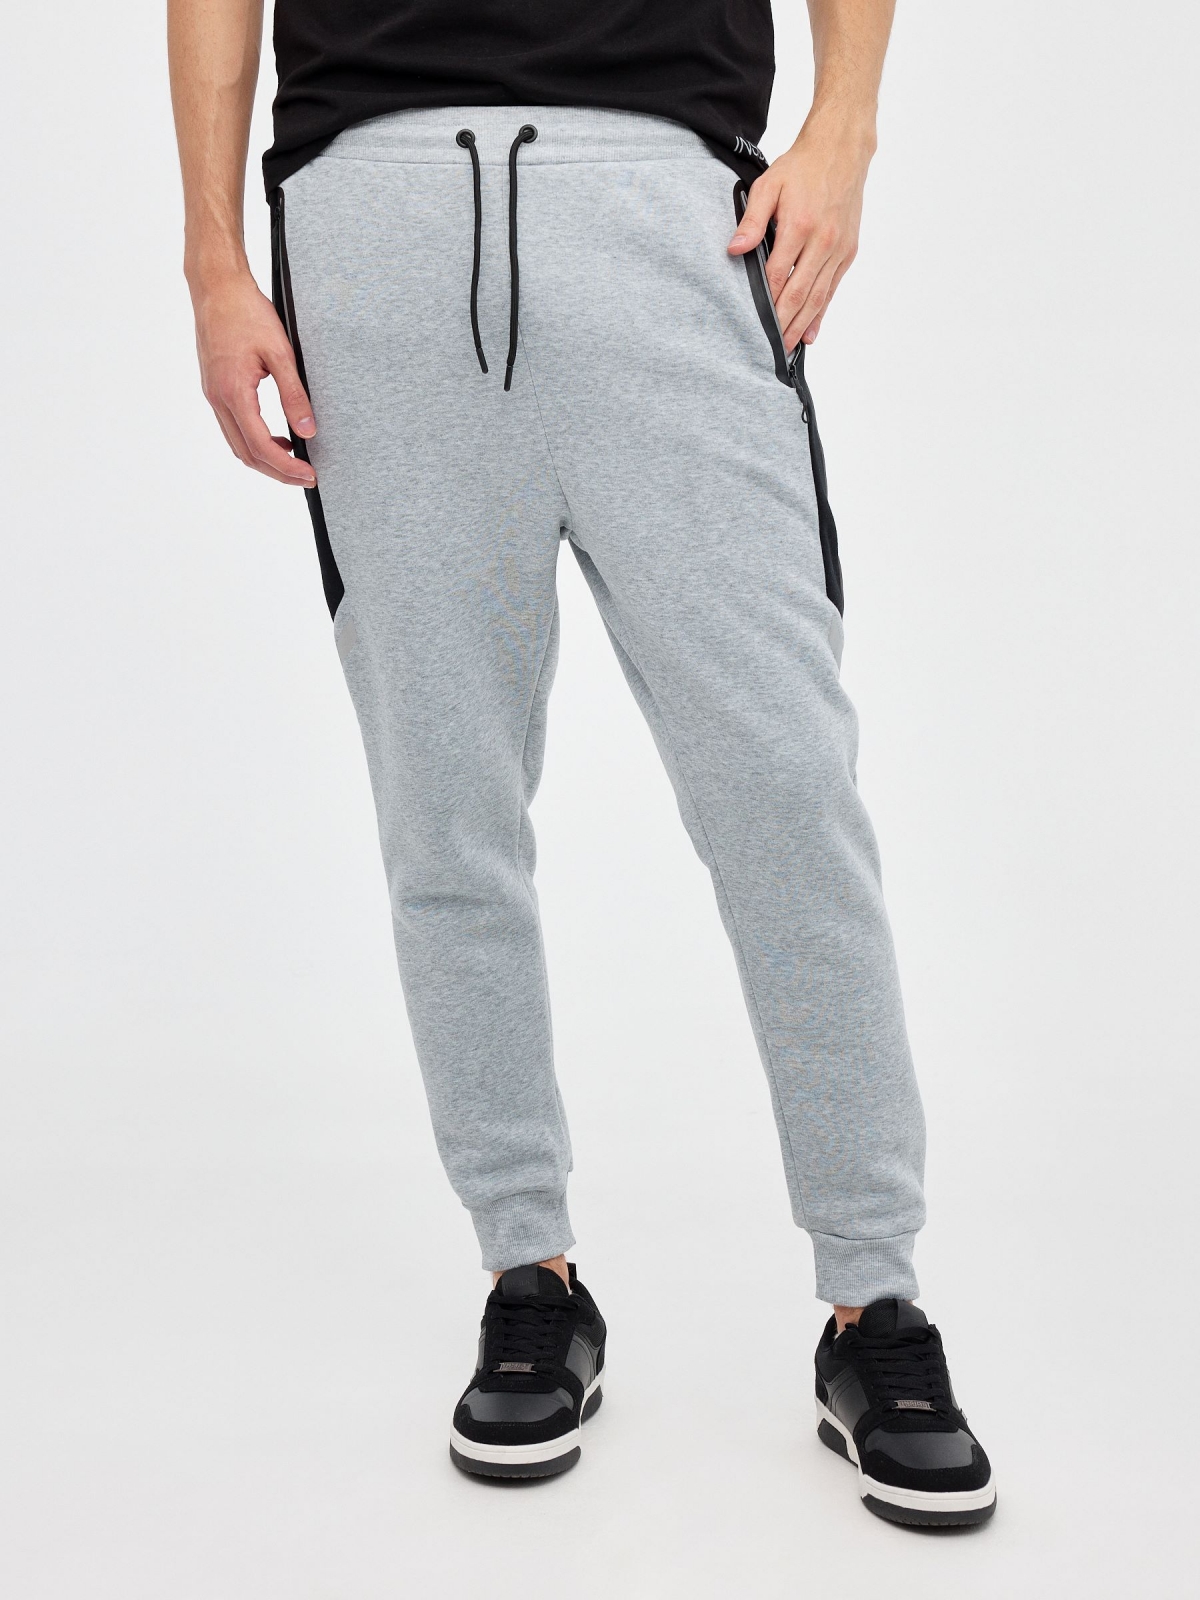 Sport jogger pants light grey middle front view